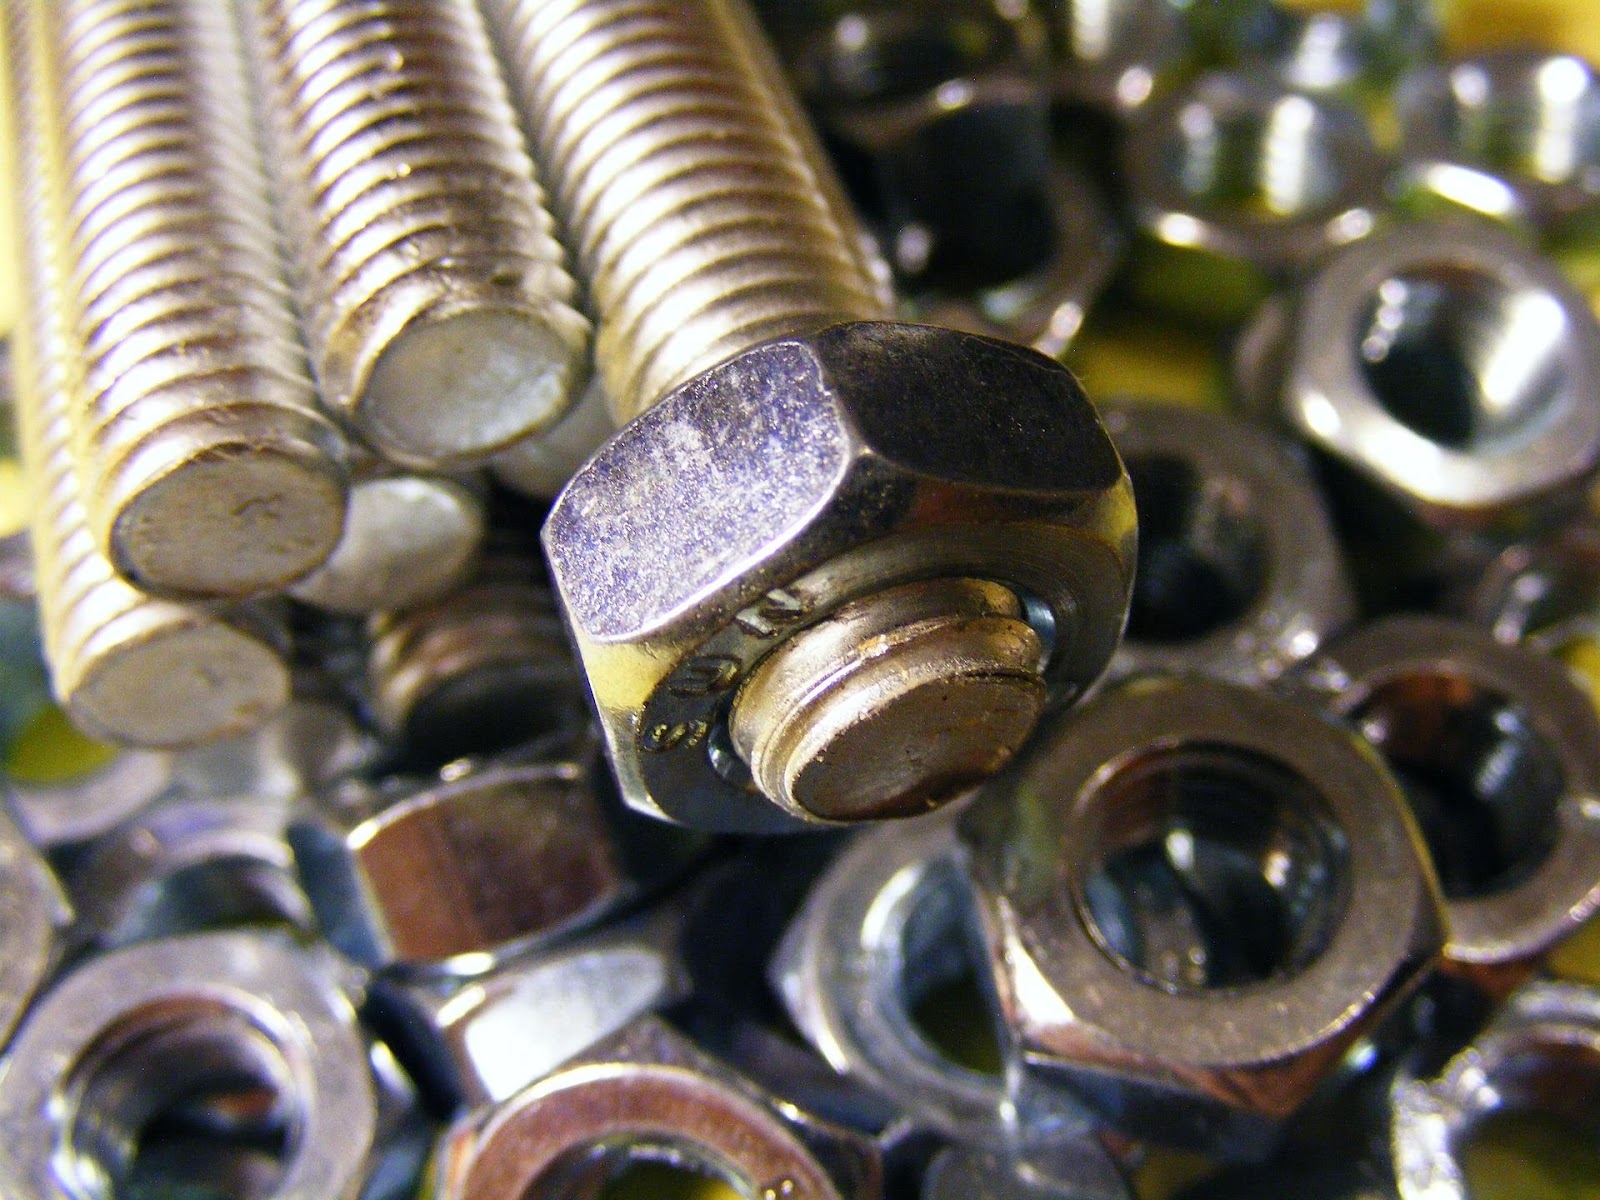 Choosing The Best Material For Your Fasteners